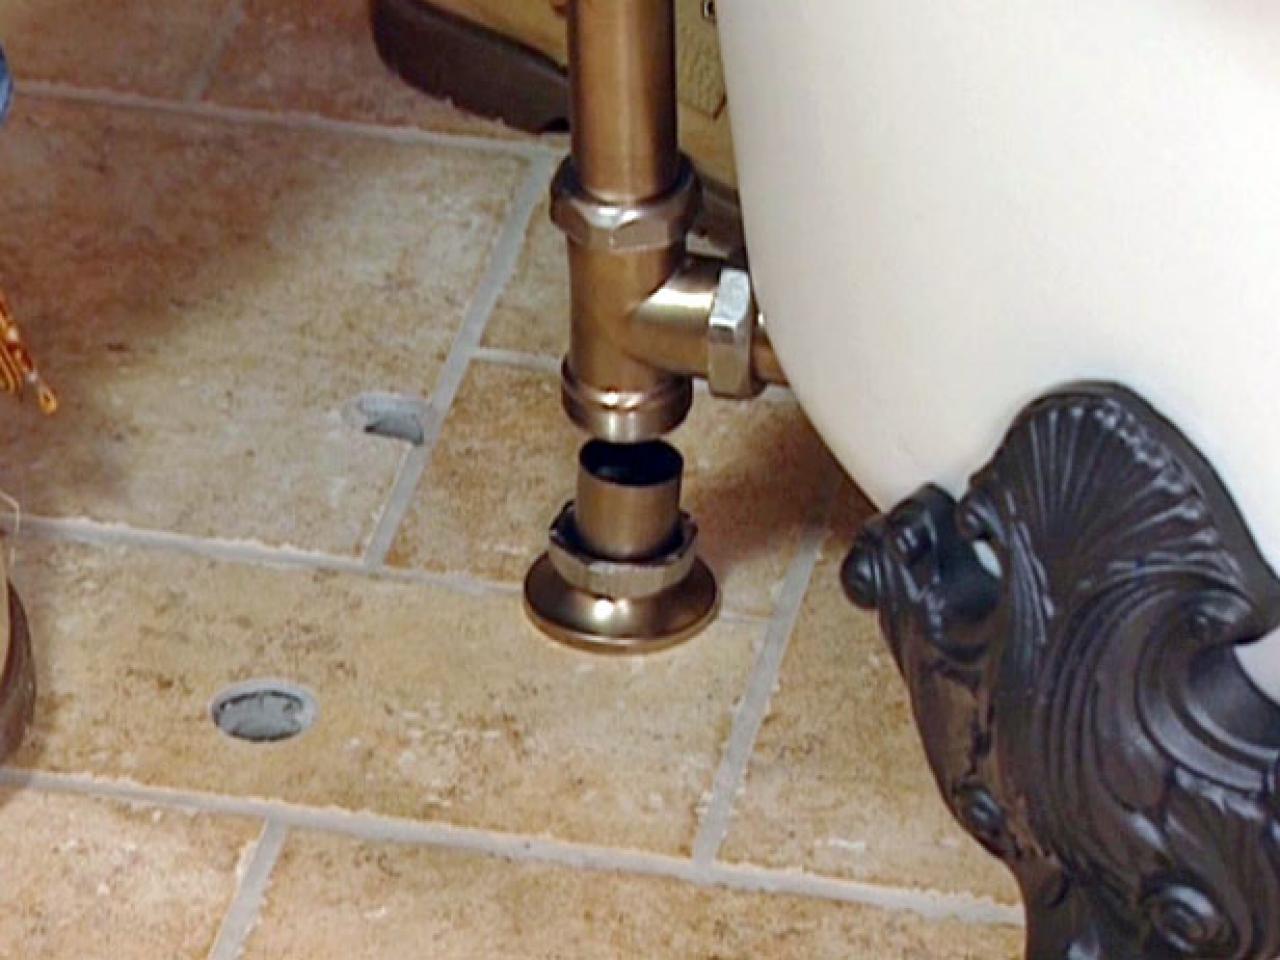 Install Plumbing For A Claw Foot Tub, Plumbing A Bathtub Drain And Overflow